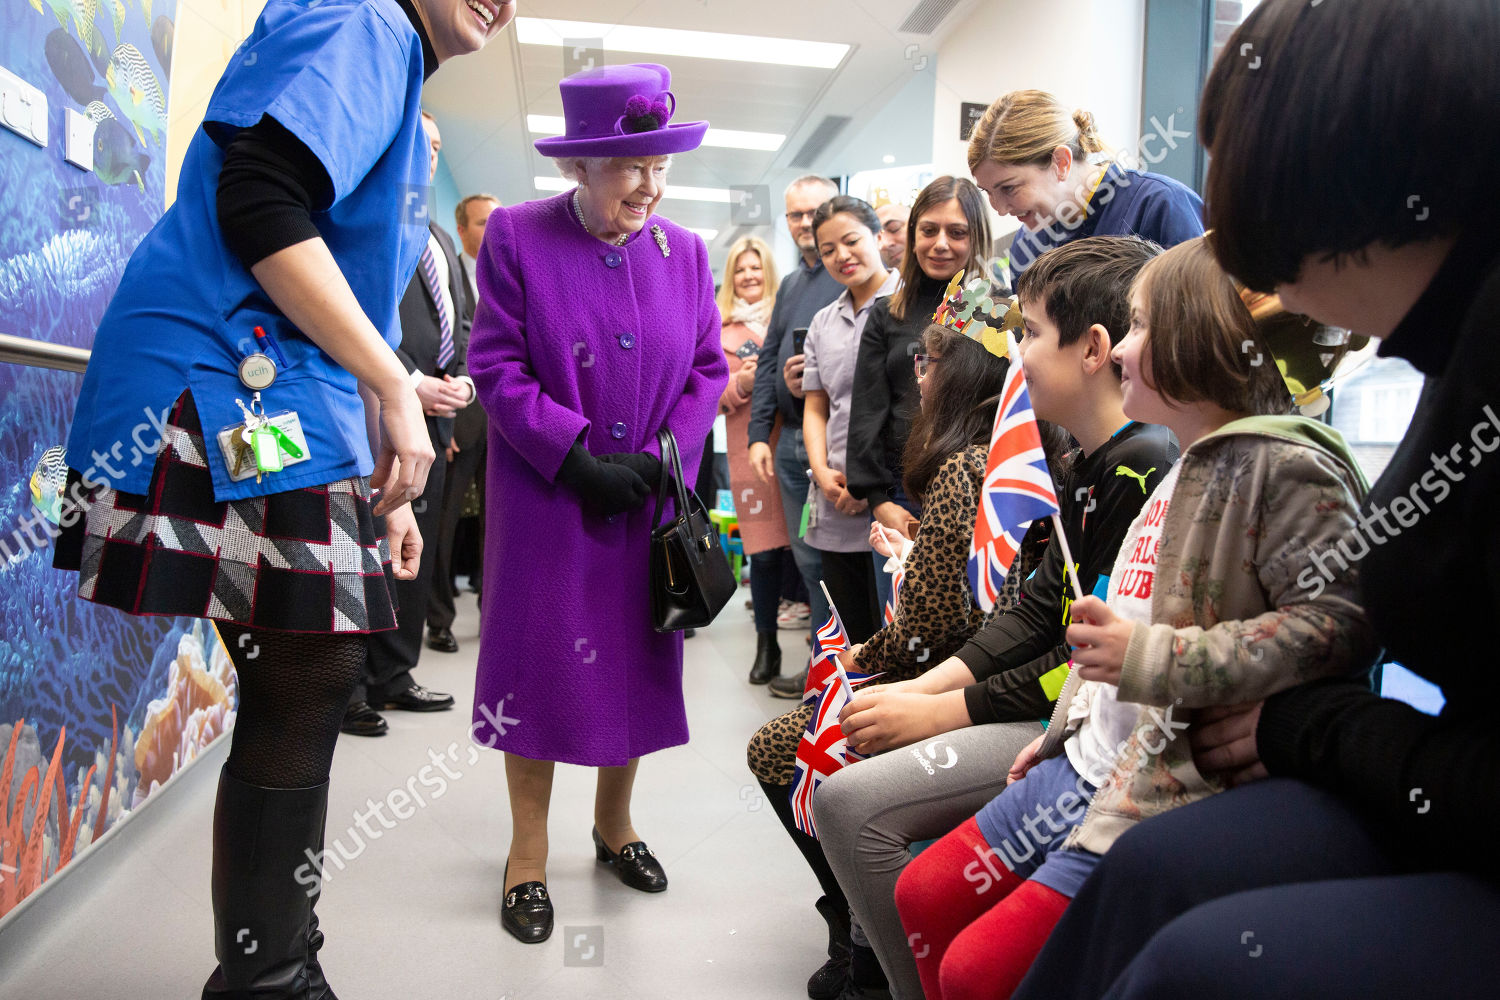 CASA REAL BRITÁNICA - Página 28 Queen-elizabeth-ii-opens-the-royal-national-ent-and-eastman-hospitals-london-uk-shutterstock-editorial-10561169ai